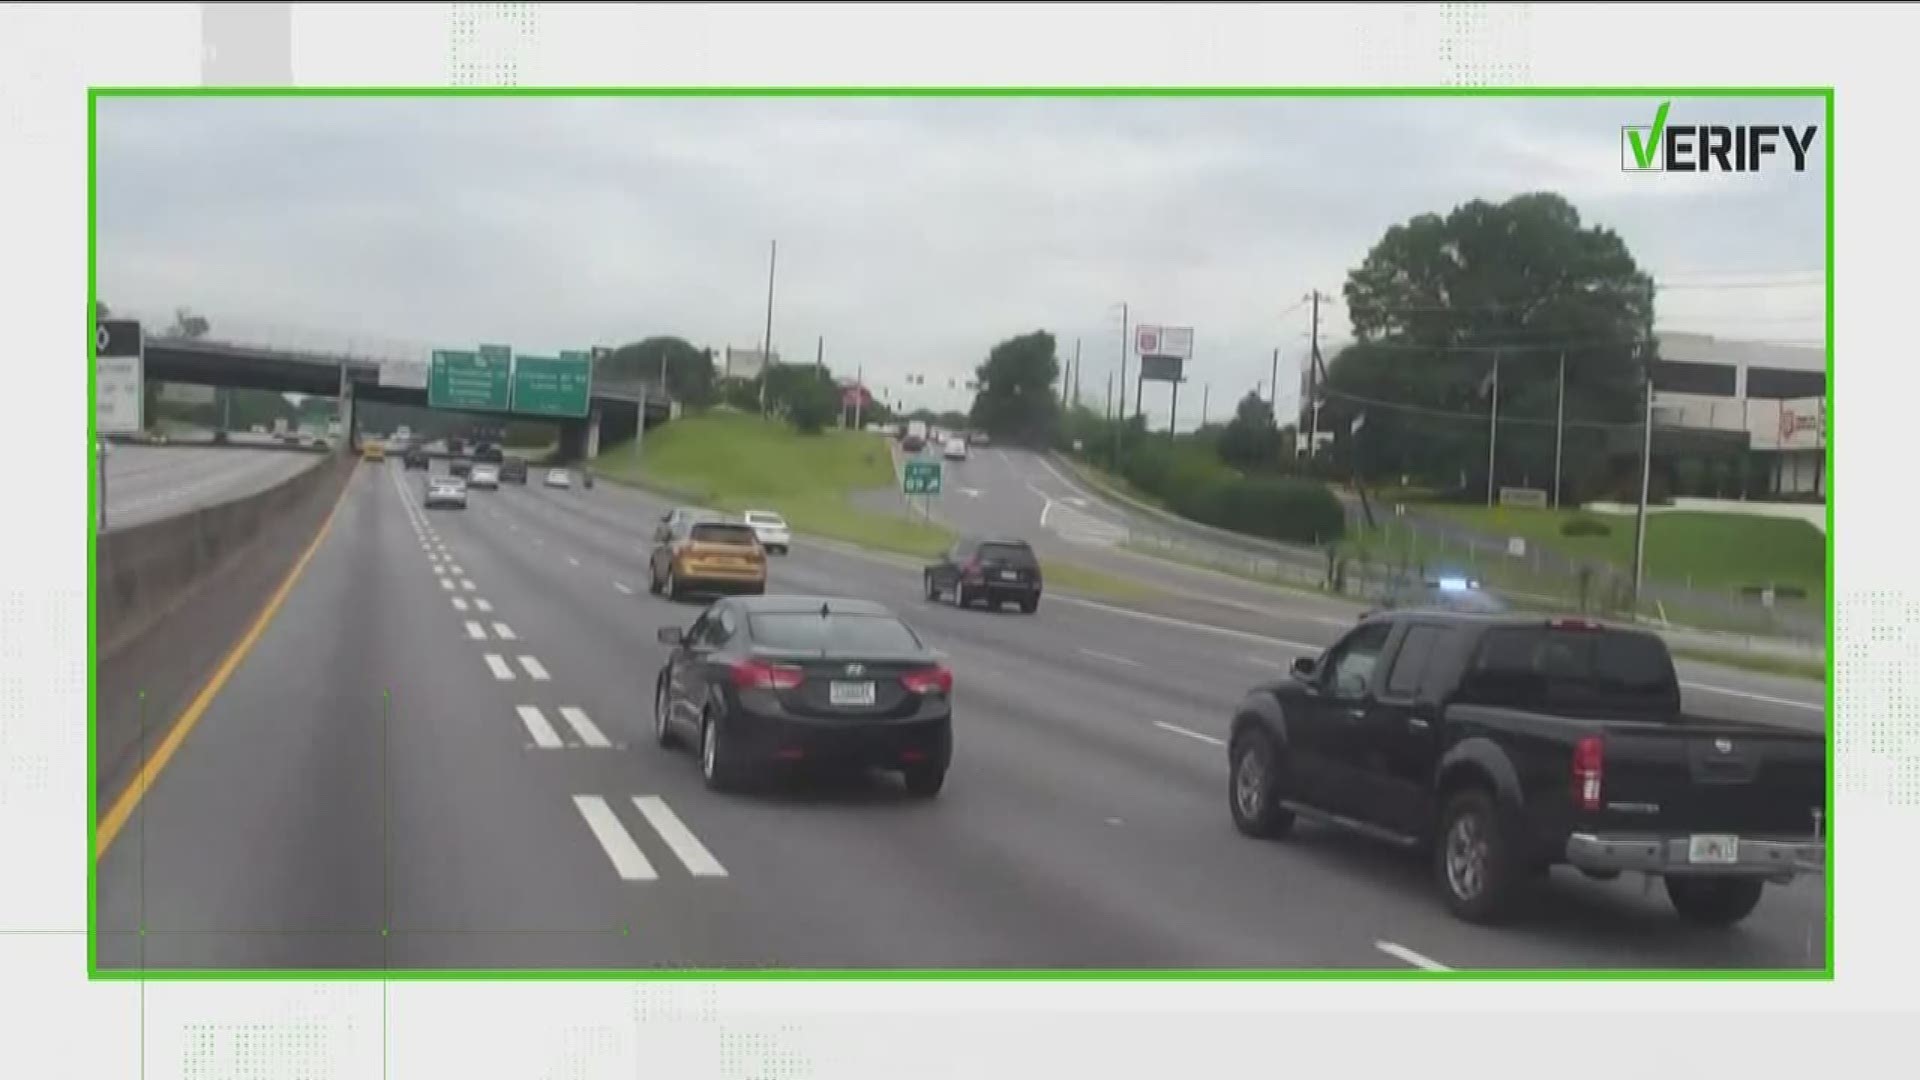 Commuters are claiming to be seeing more solo drivers illegally using the HOV lanes. What do law enforcement agencies do to stop it?